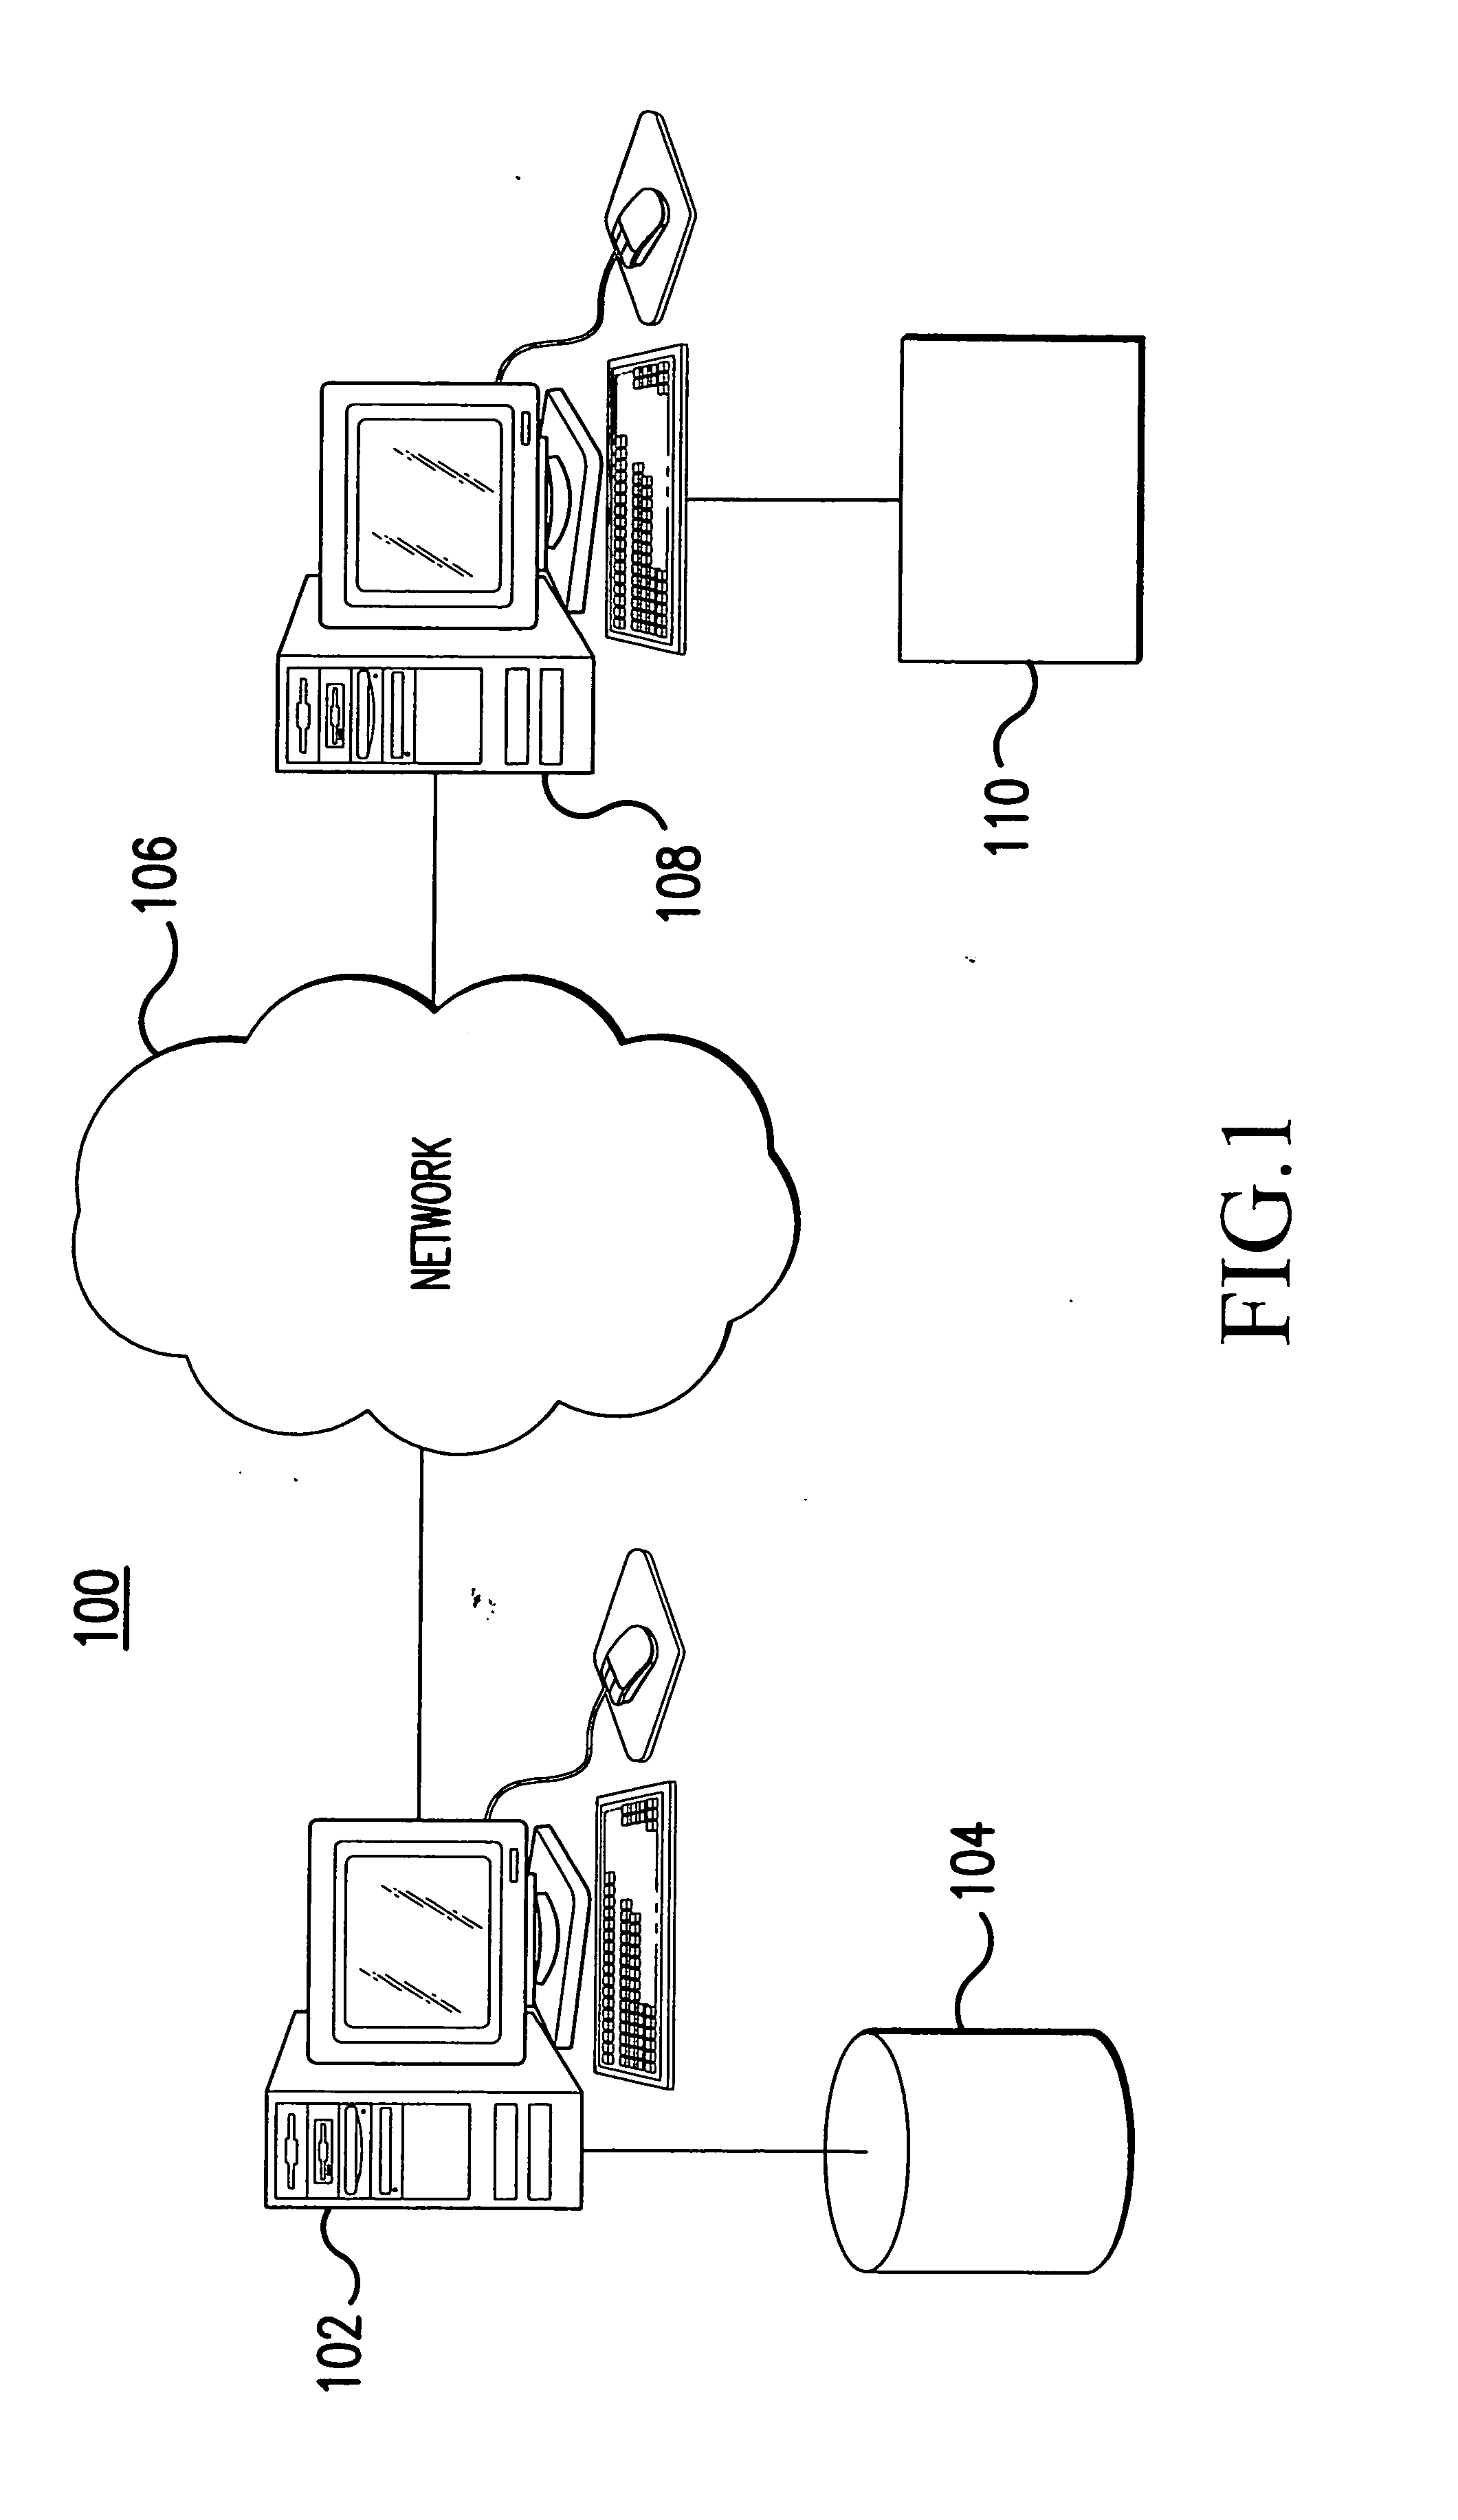 Systems and methods for displaying a cellular abnormality